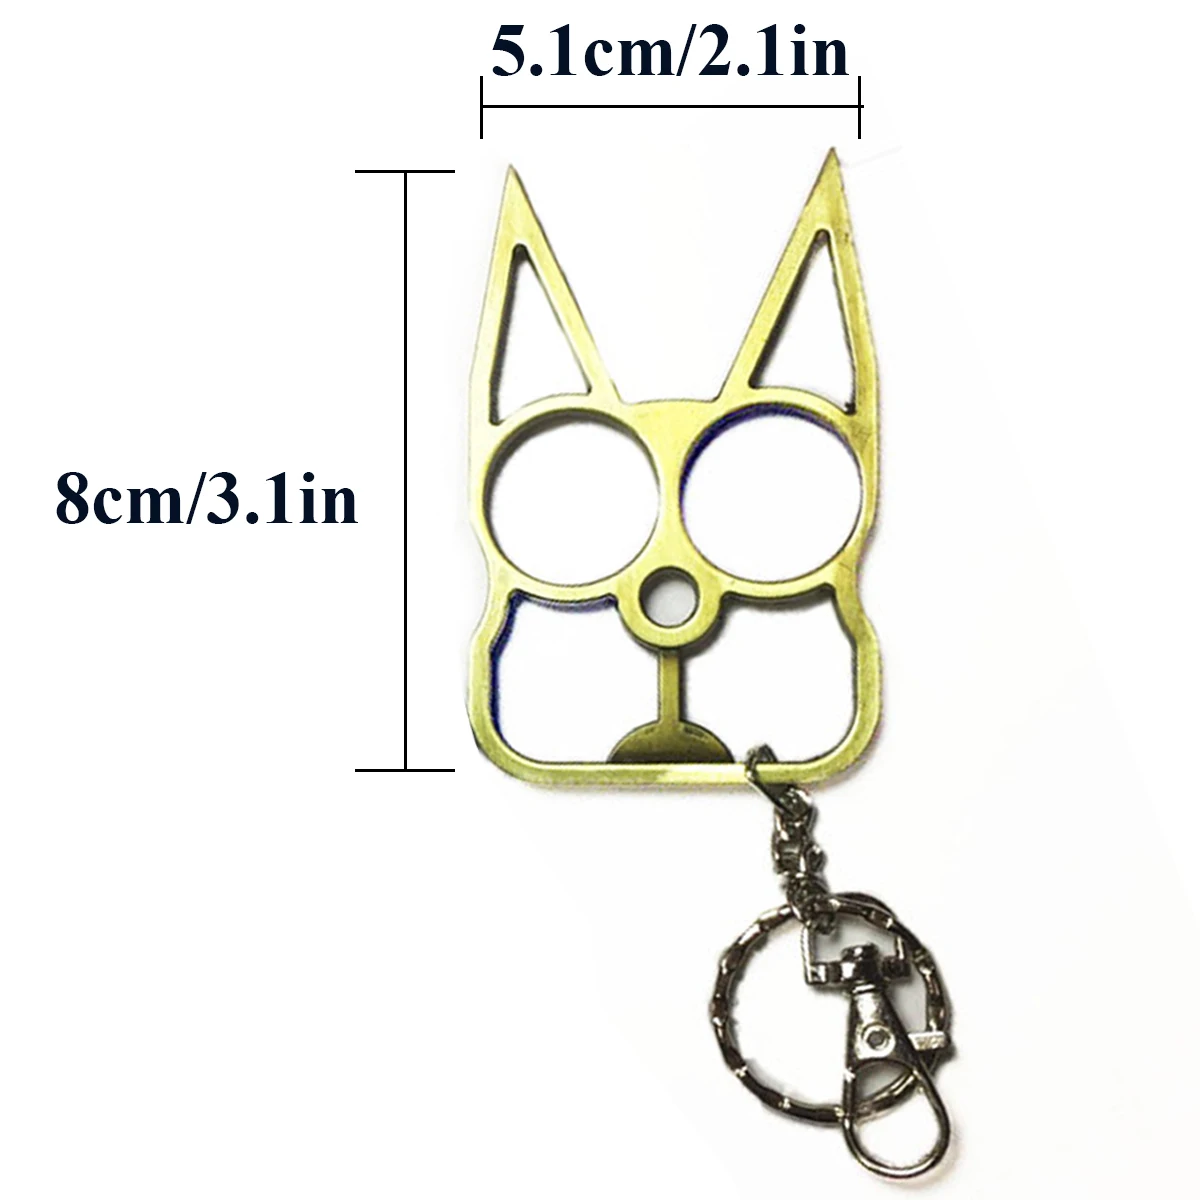 Hot Sales Cute Cat Self Defense Keychain For Women Girls Alloy Fashion Personal Defense Keychain Drill Stinger Ring Equipment